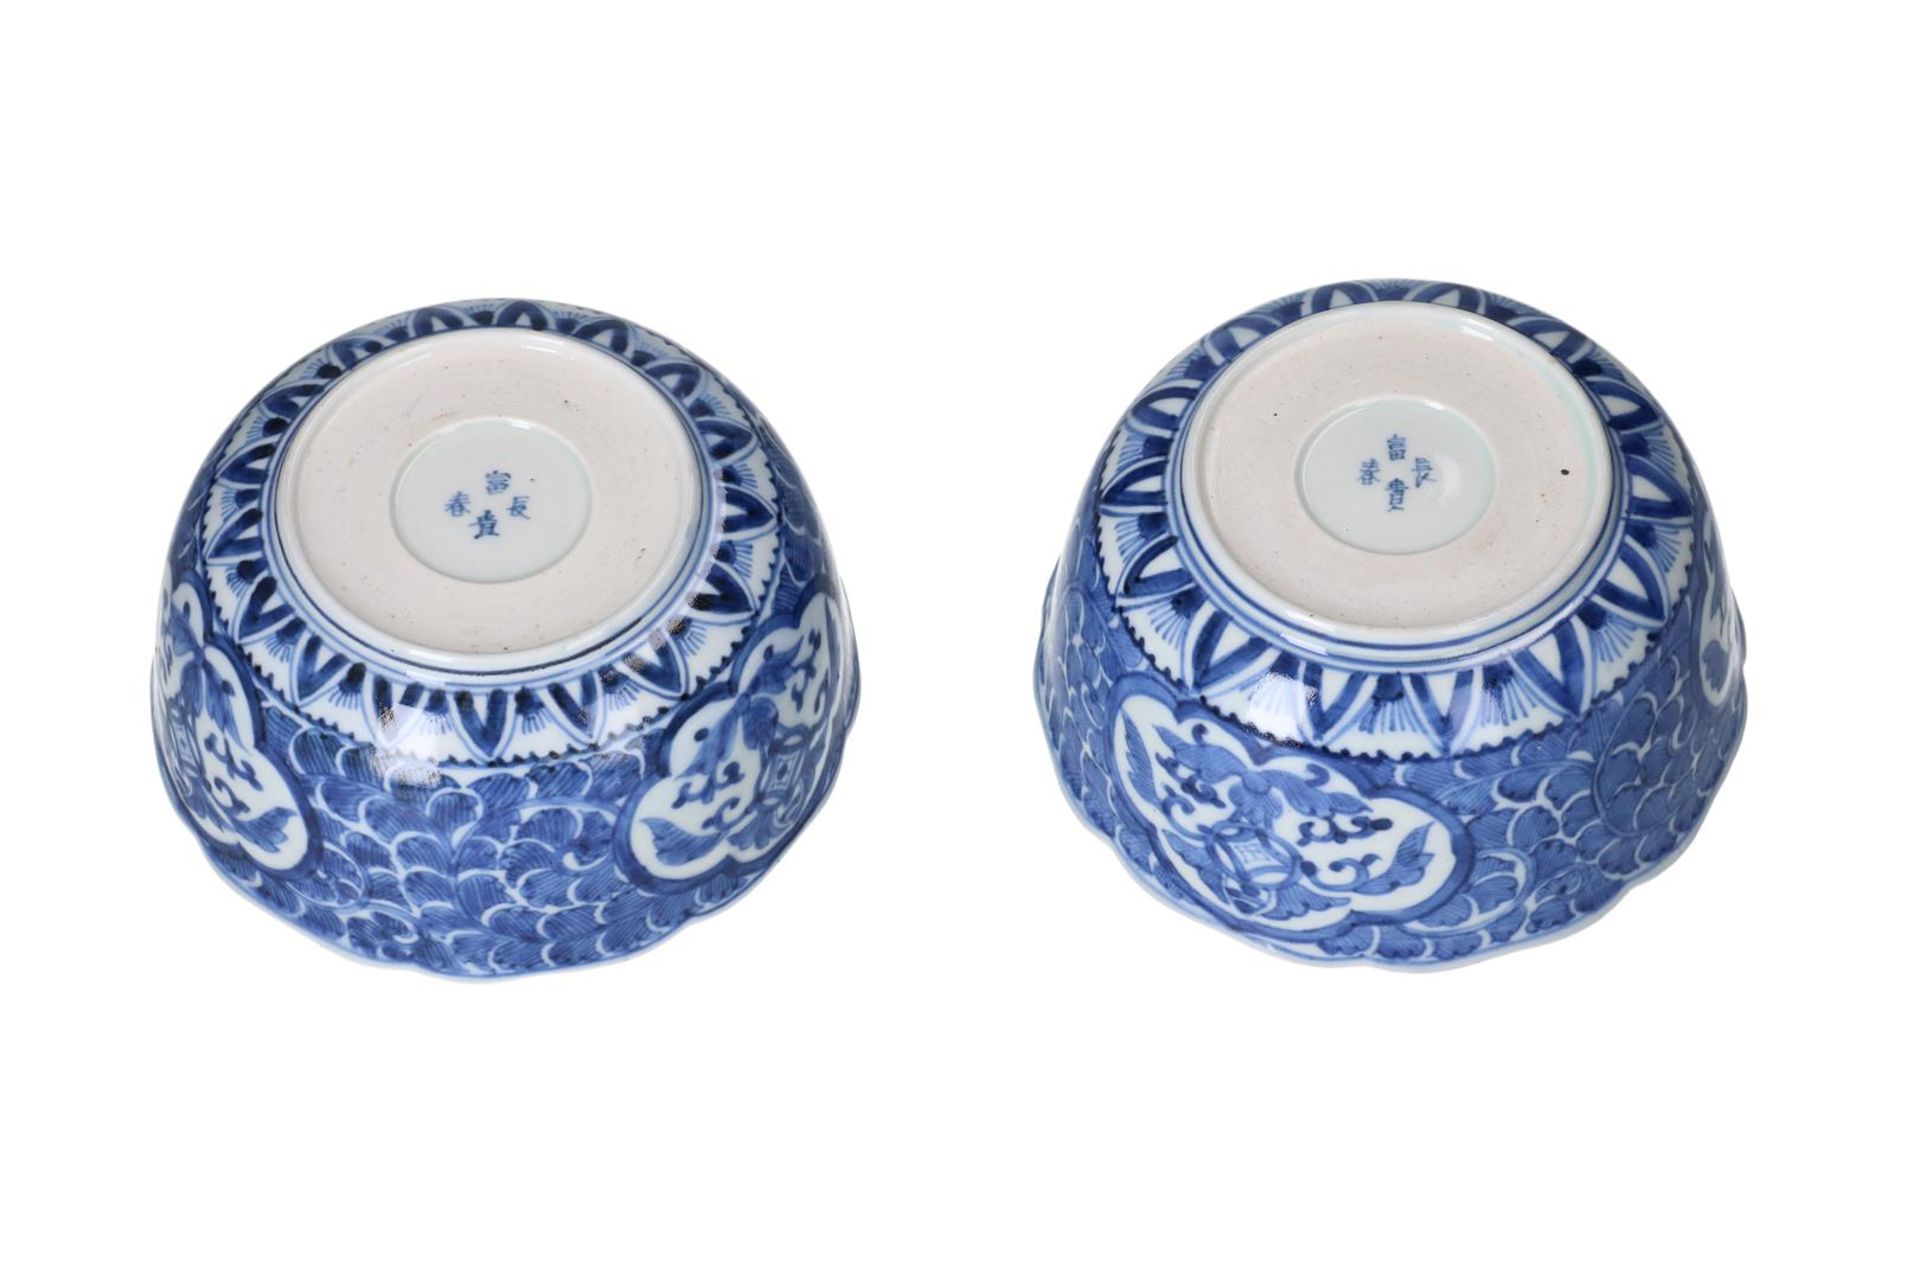 A pair of blue and white porcelain bowls, decorated with flowers. Marked with 4-character mark. - Image 7 of 7